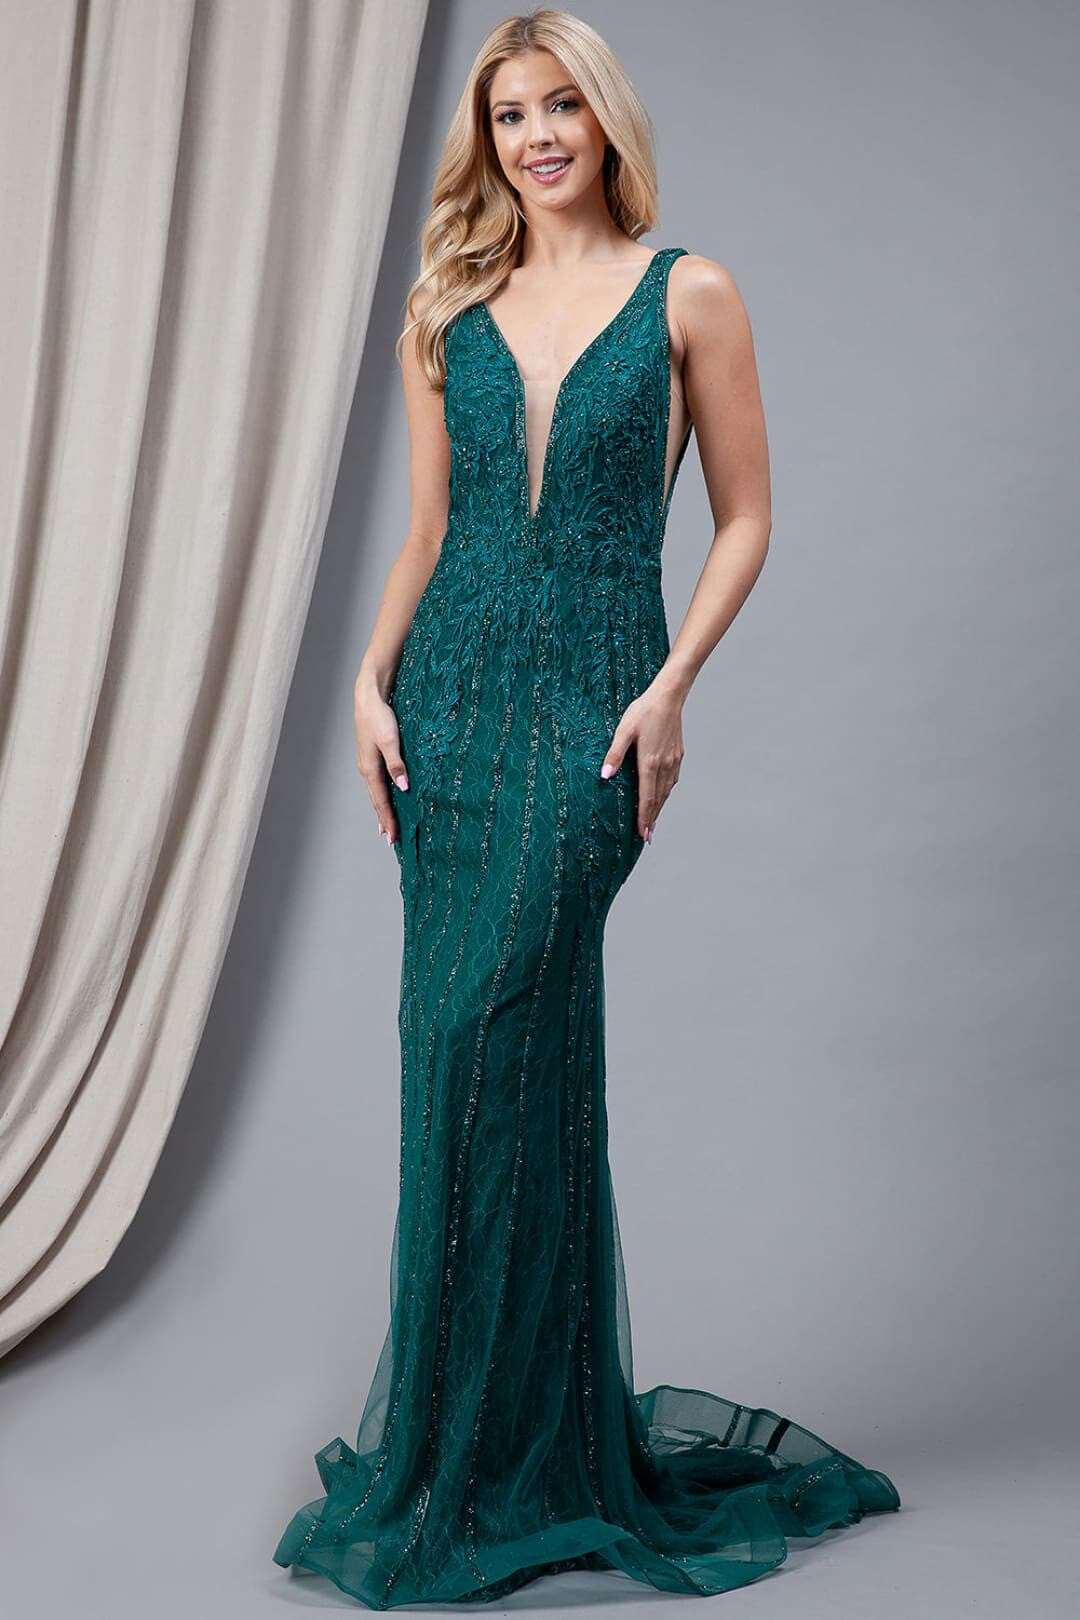 Amelia Couture 2103 Sleeveless Mermaid Evening Gown - EMERALD GREEN / 2